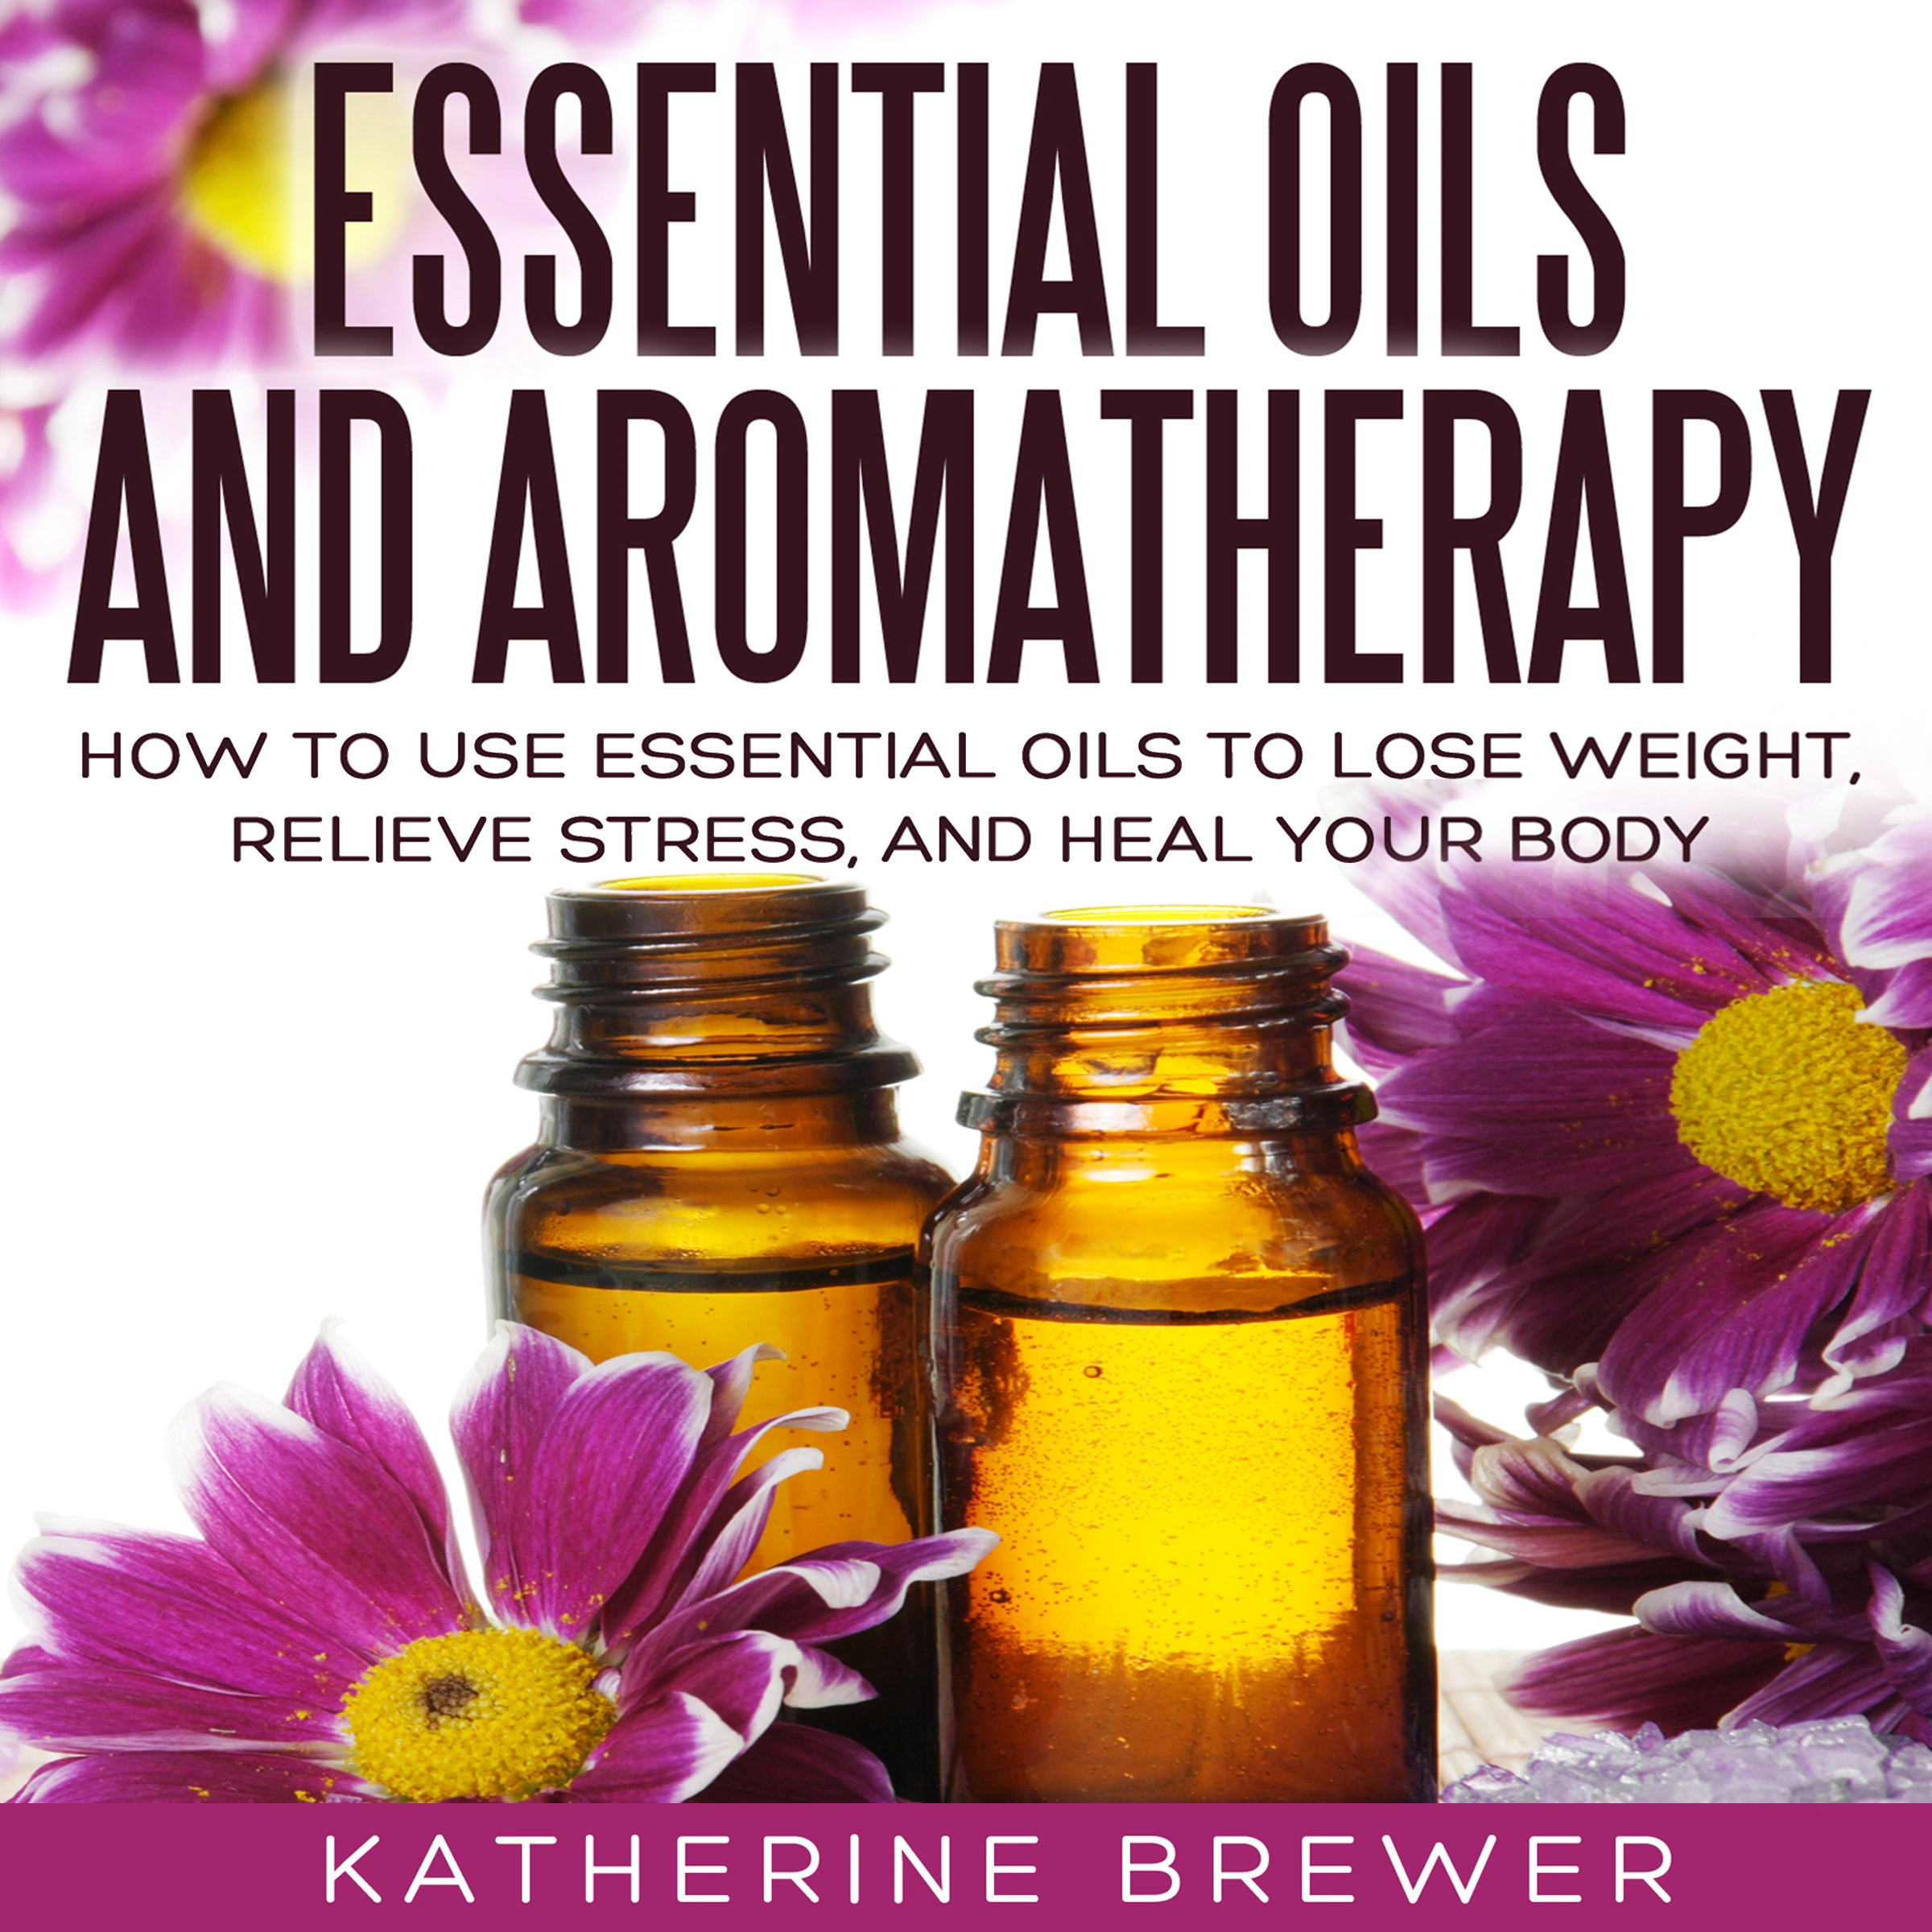 Essential Oils and Aromatherapy Audiobook by Katherine Brewer